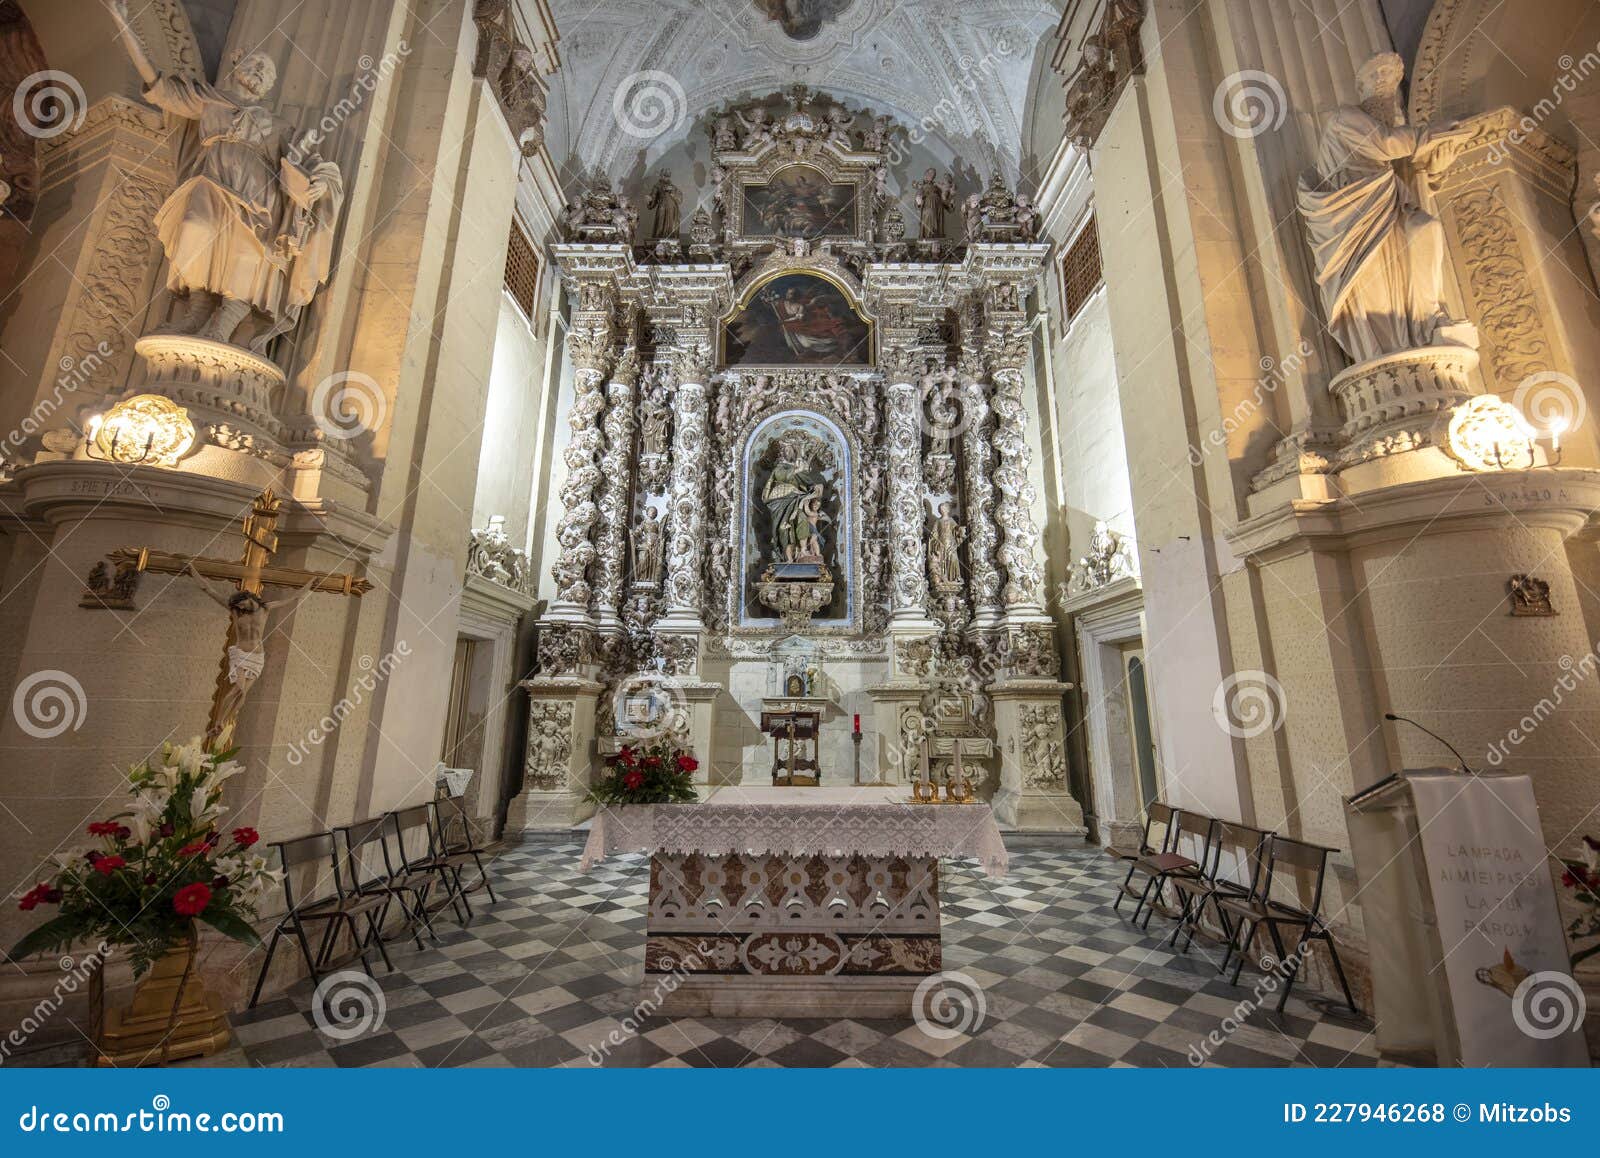 church of san matteo in lecce, italy